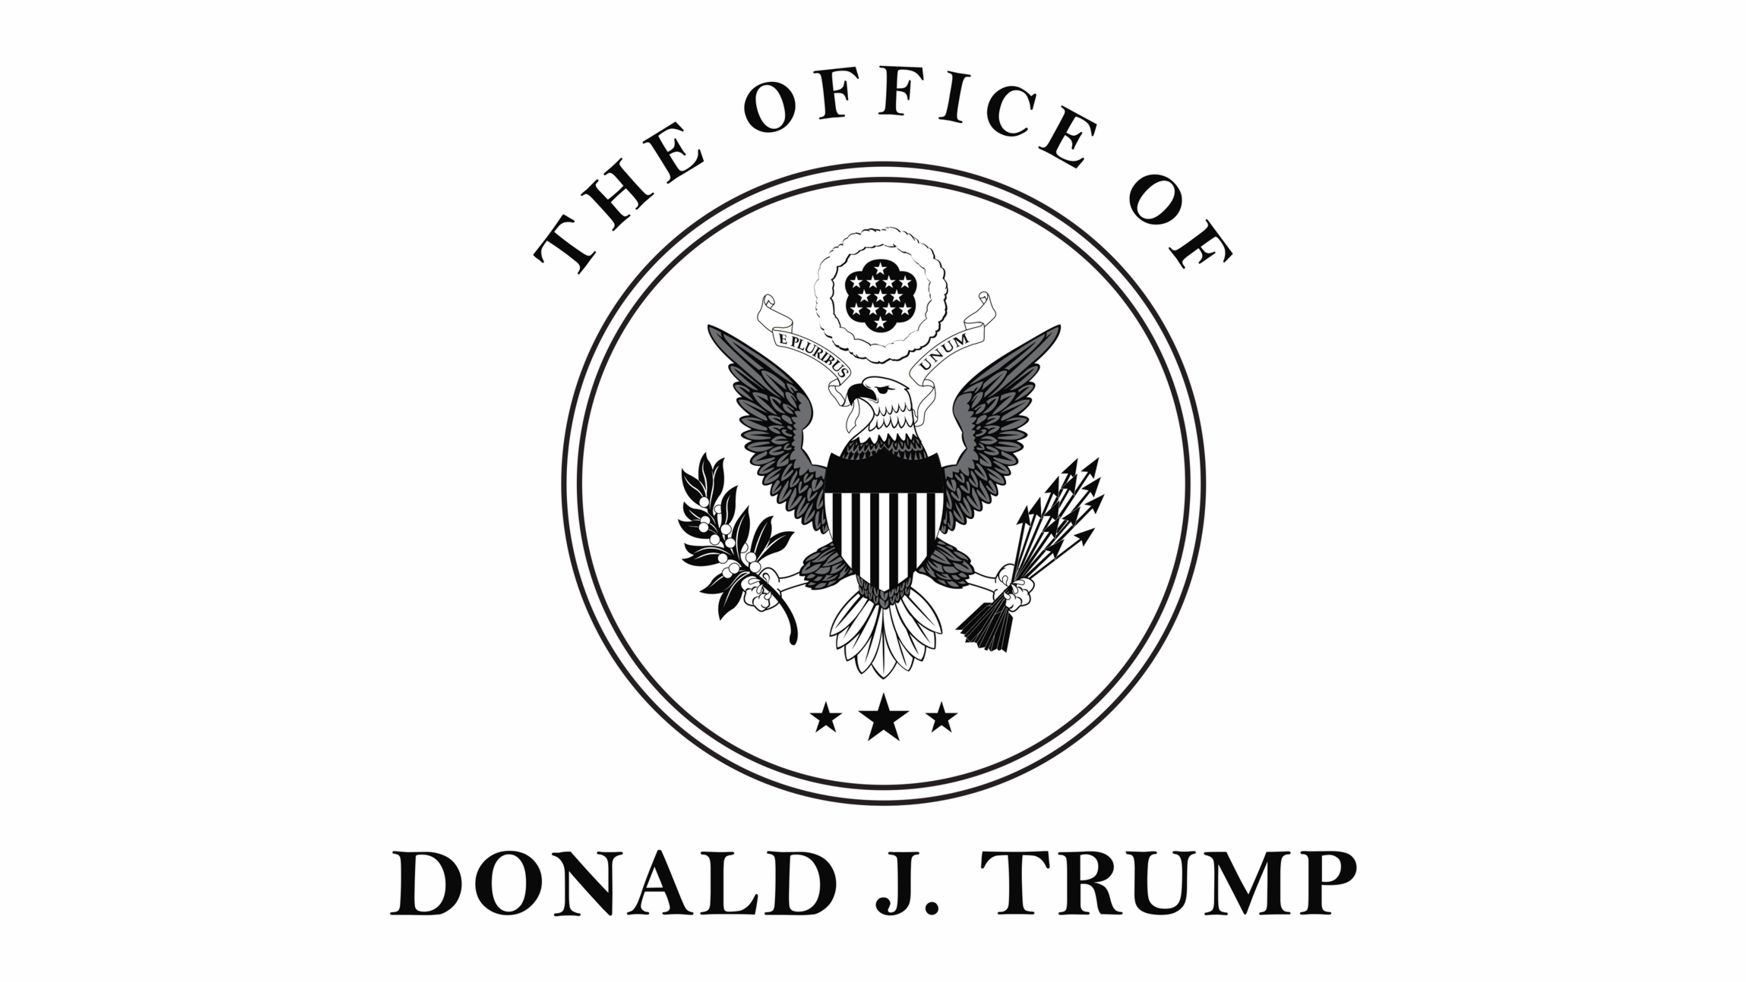 The Office of Donald J Trump